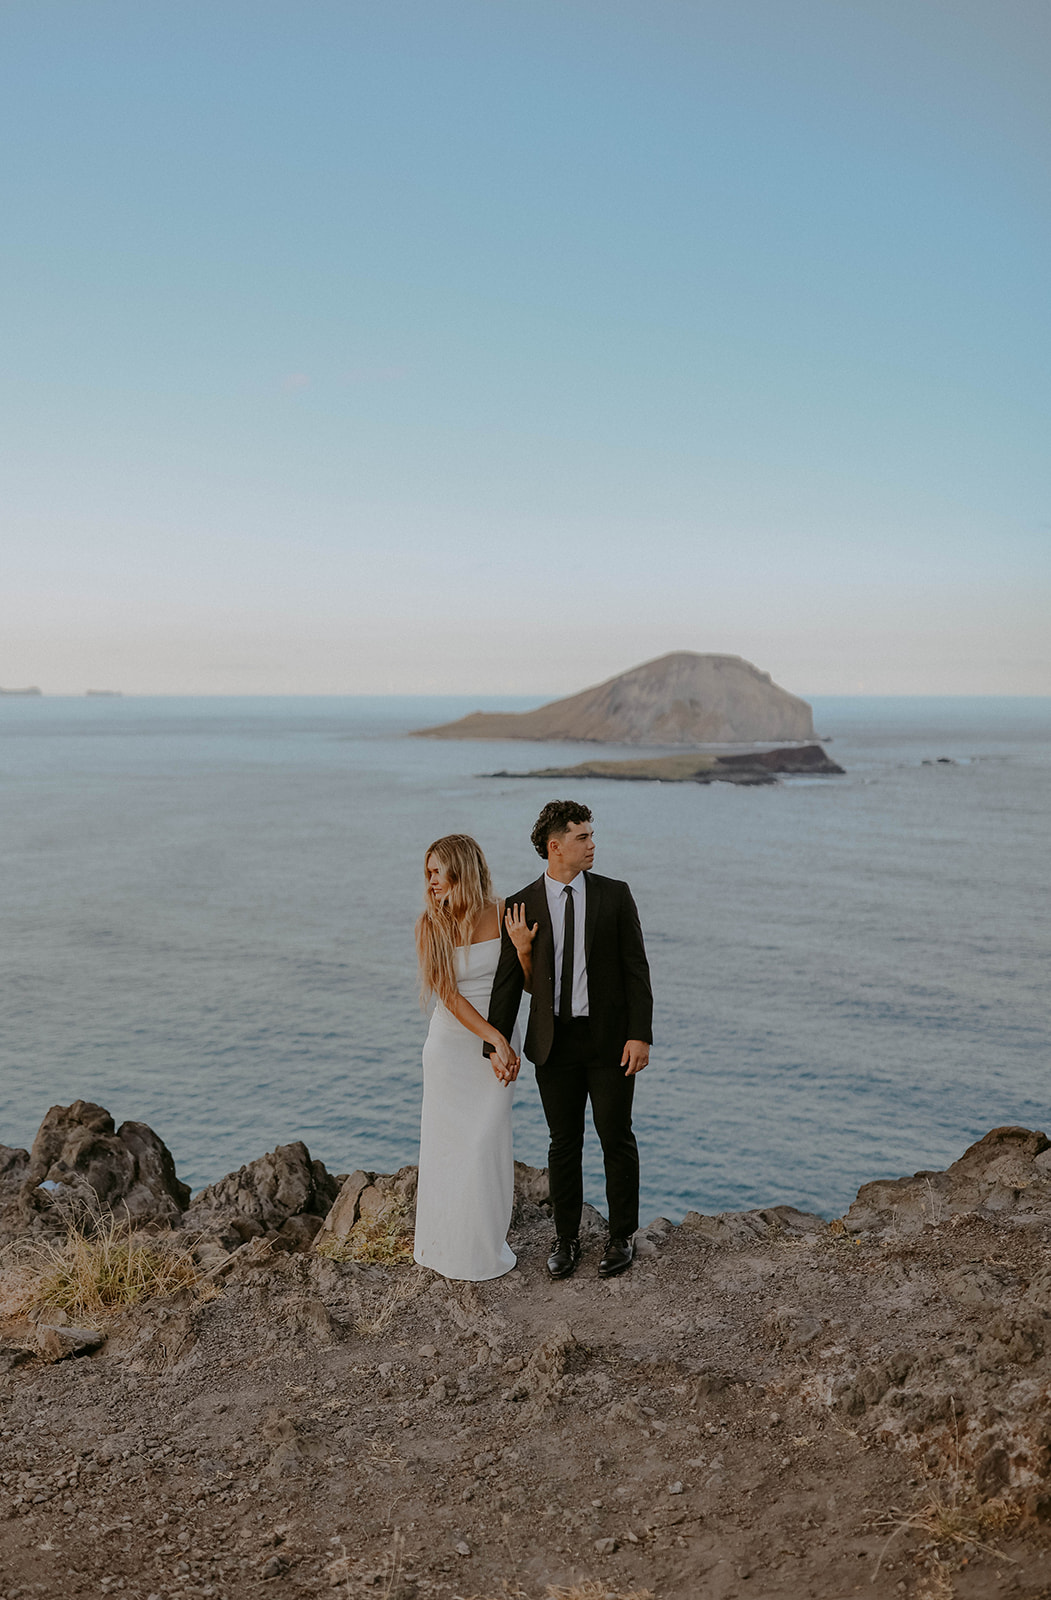 a bride and groom dressed in wedding day outfits pose on a cliff overlooking the ocean during their elopement in oahu hawaii